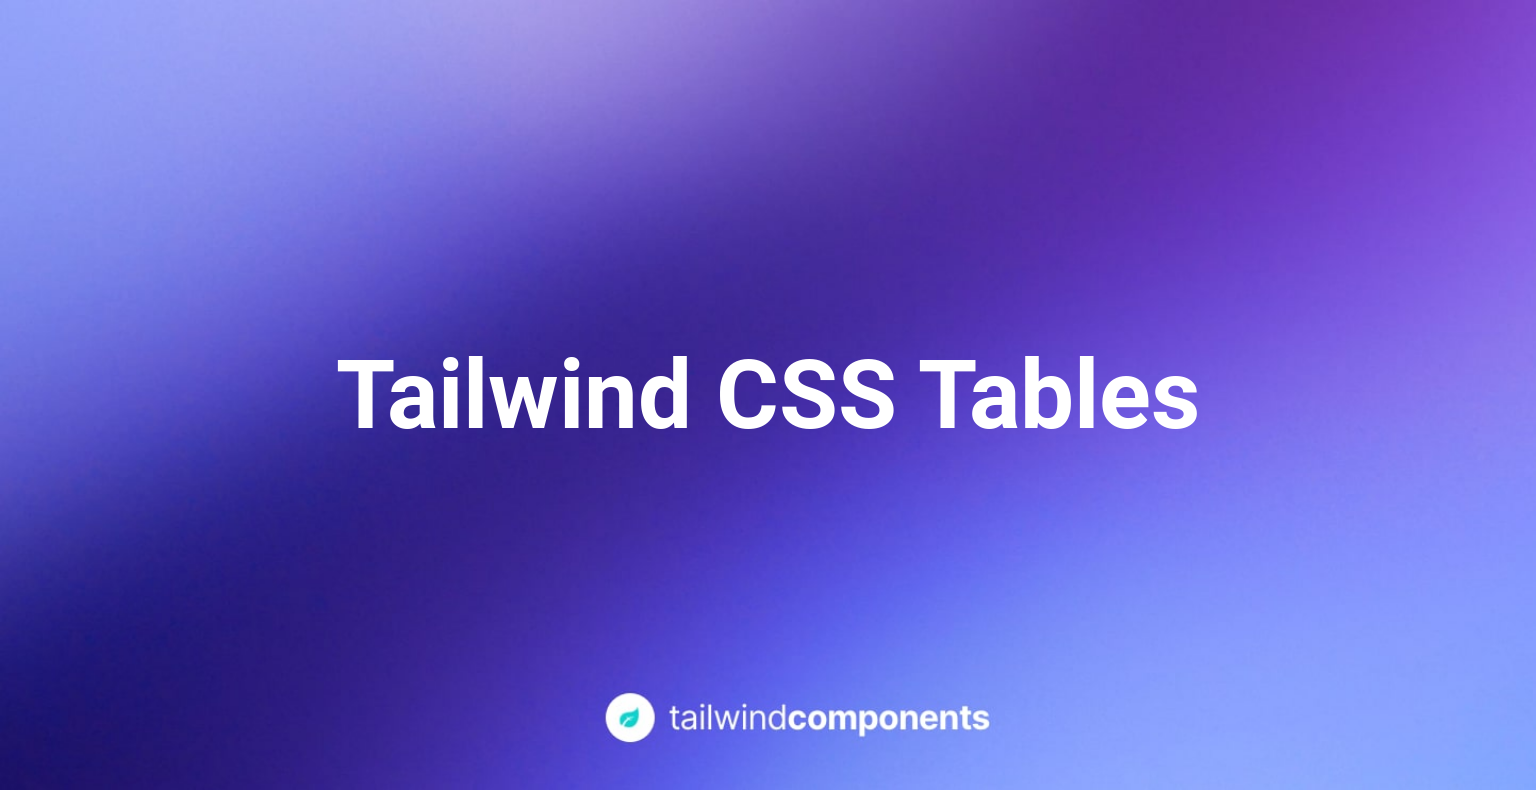 Tailwind CSS Tables Image